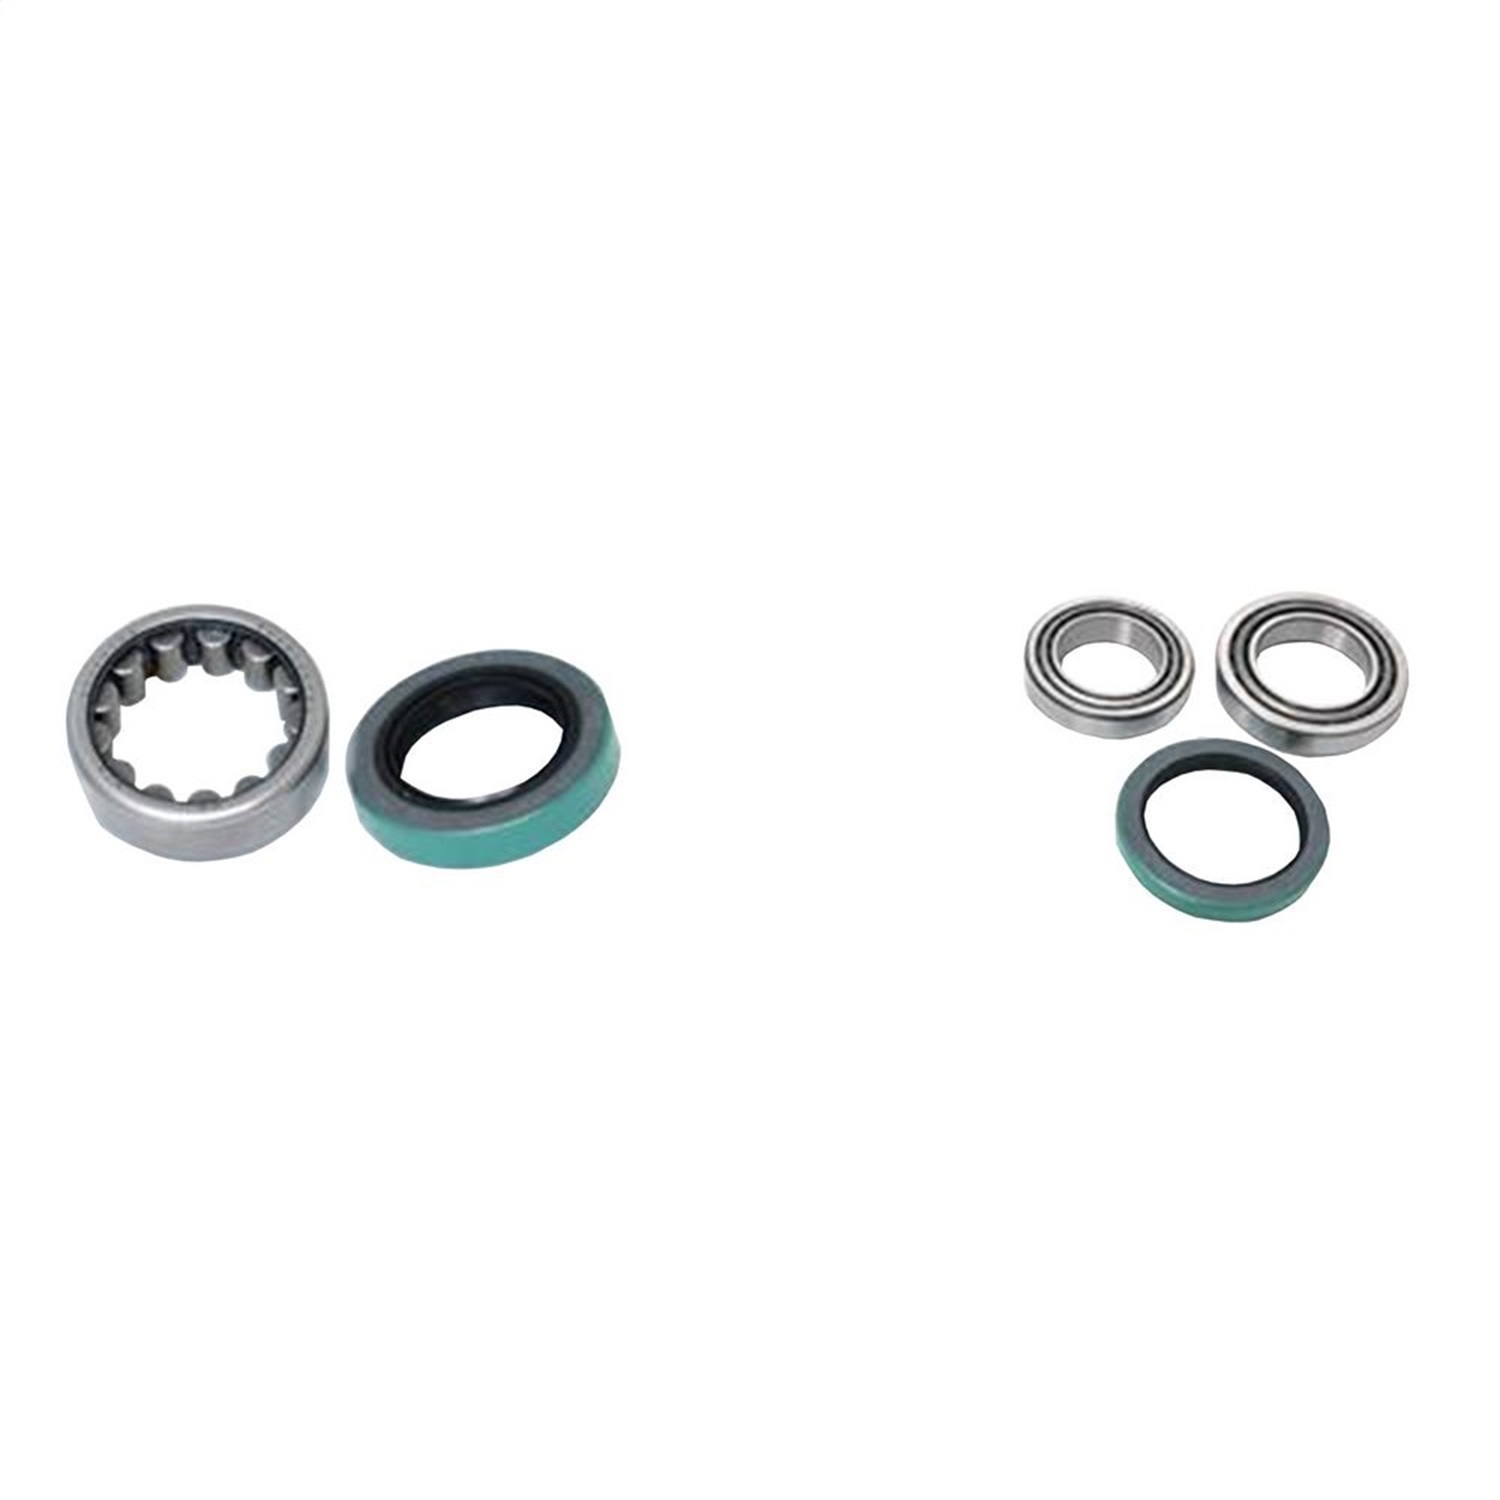 G2 Axle and Gear G2 Axle and Gear 30-8008 Wheel Bearing Kit